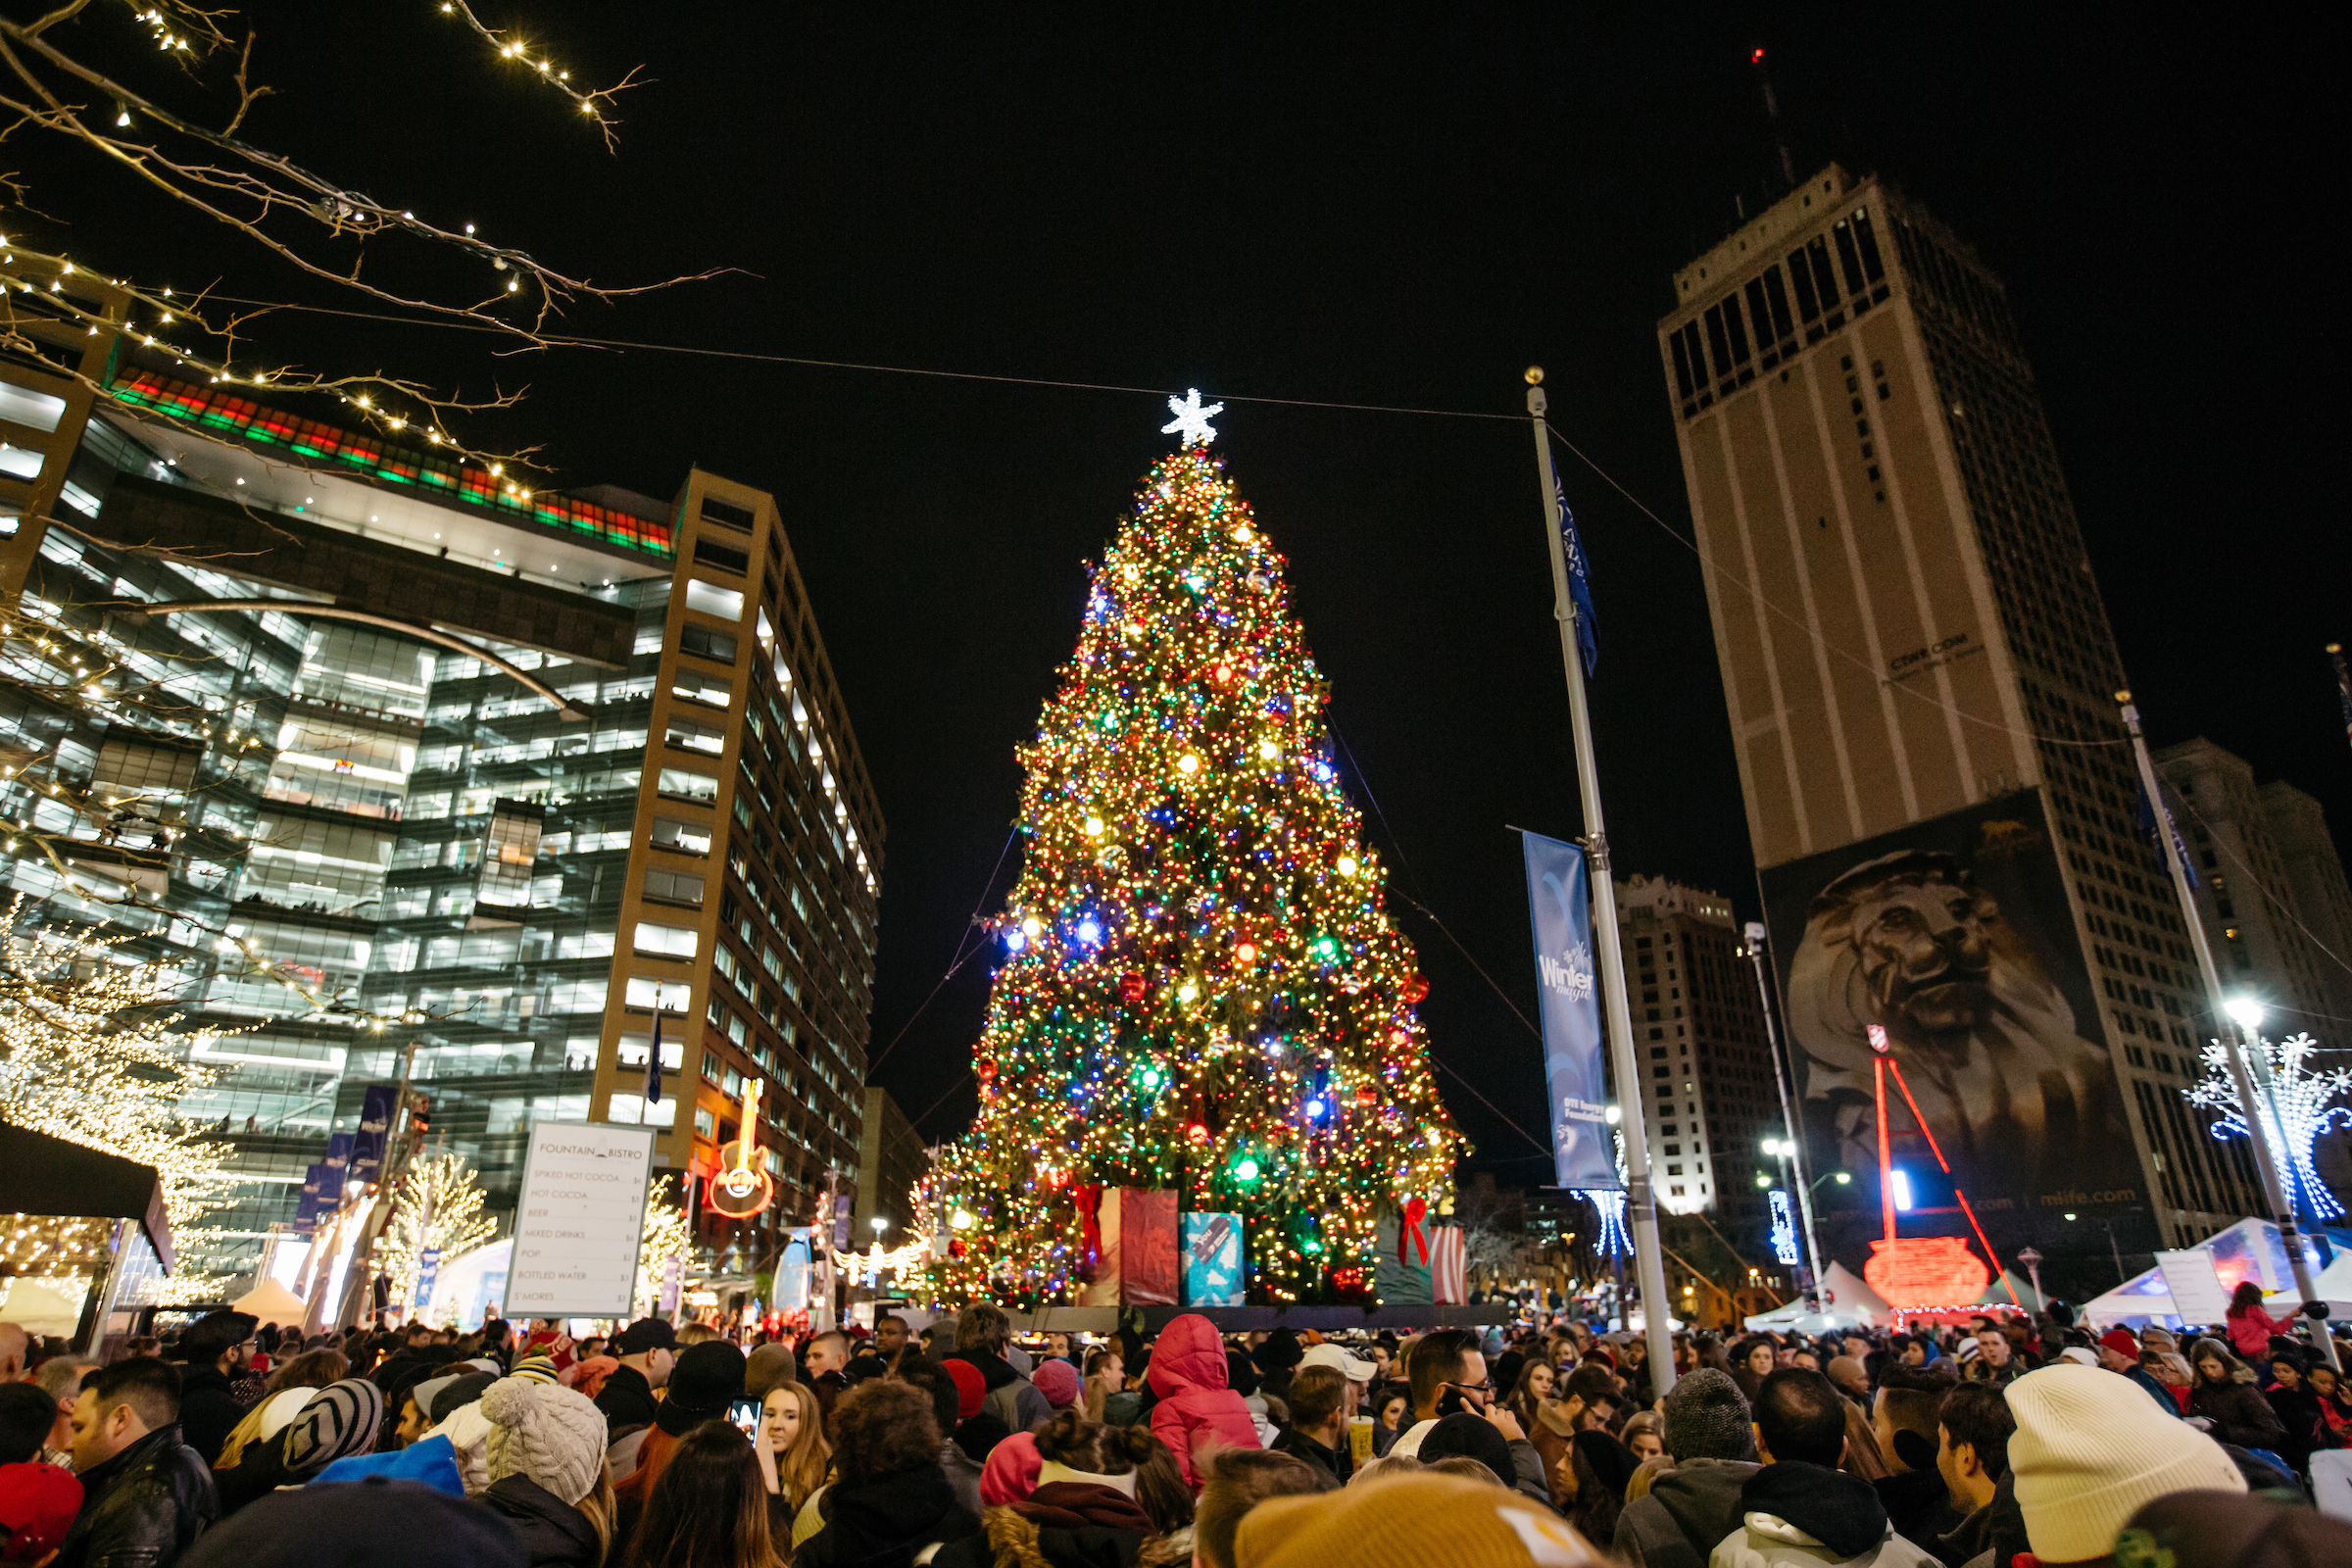 A huge Christmas lit up at night in Campus Martius Park is surrounded by people.